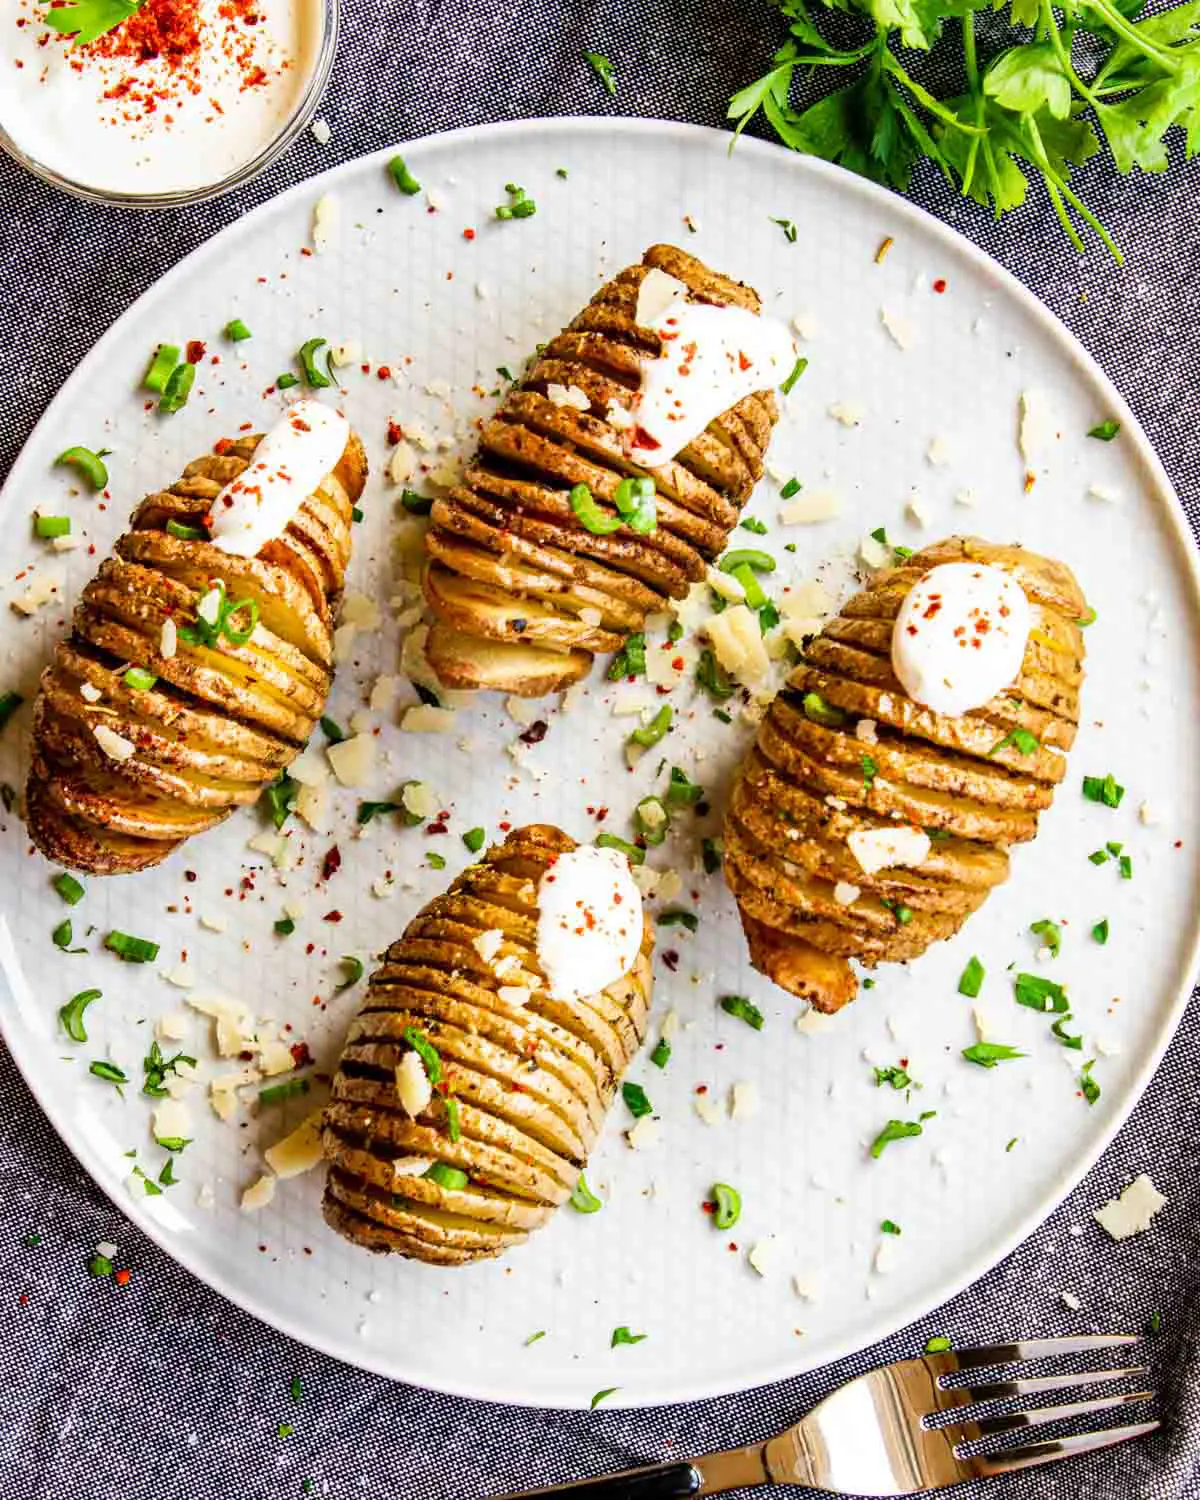 4 hasselback potatoes on a white plate with sour cream and parsley.